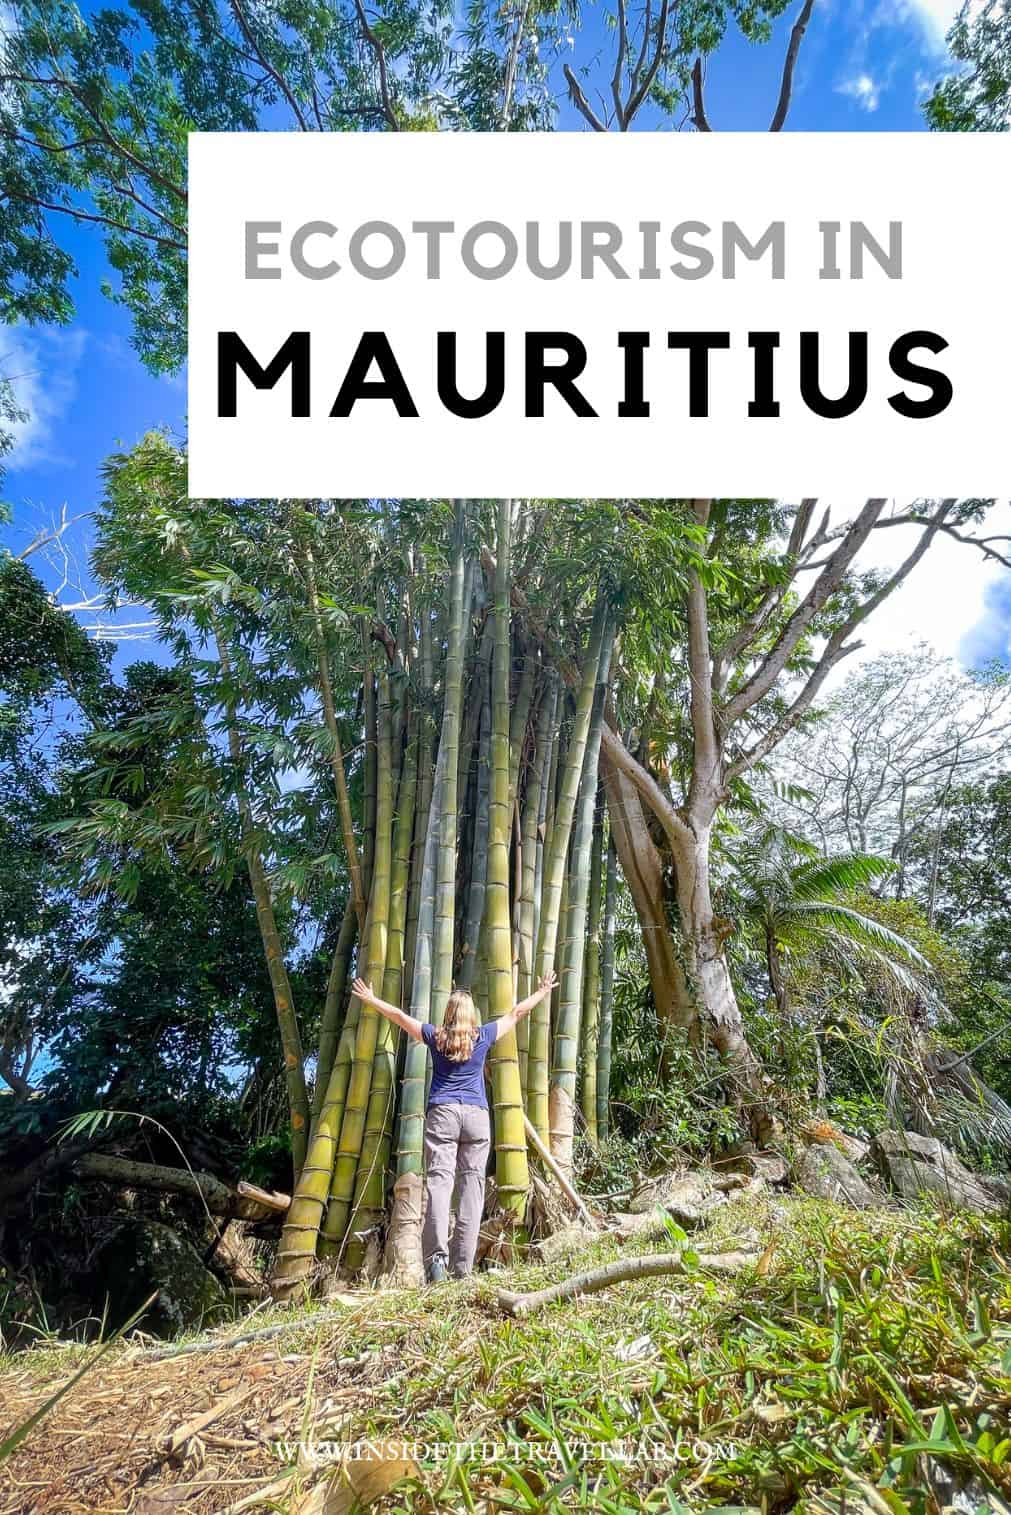 Ecotourism in Mauritius cover image - woman hugging tree with title overlay